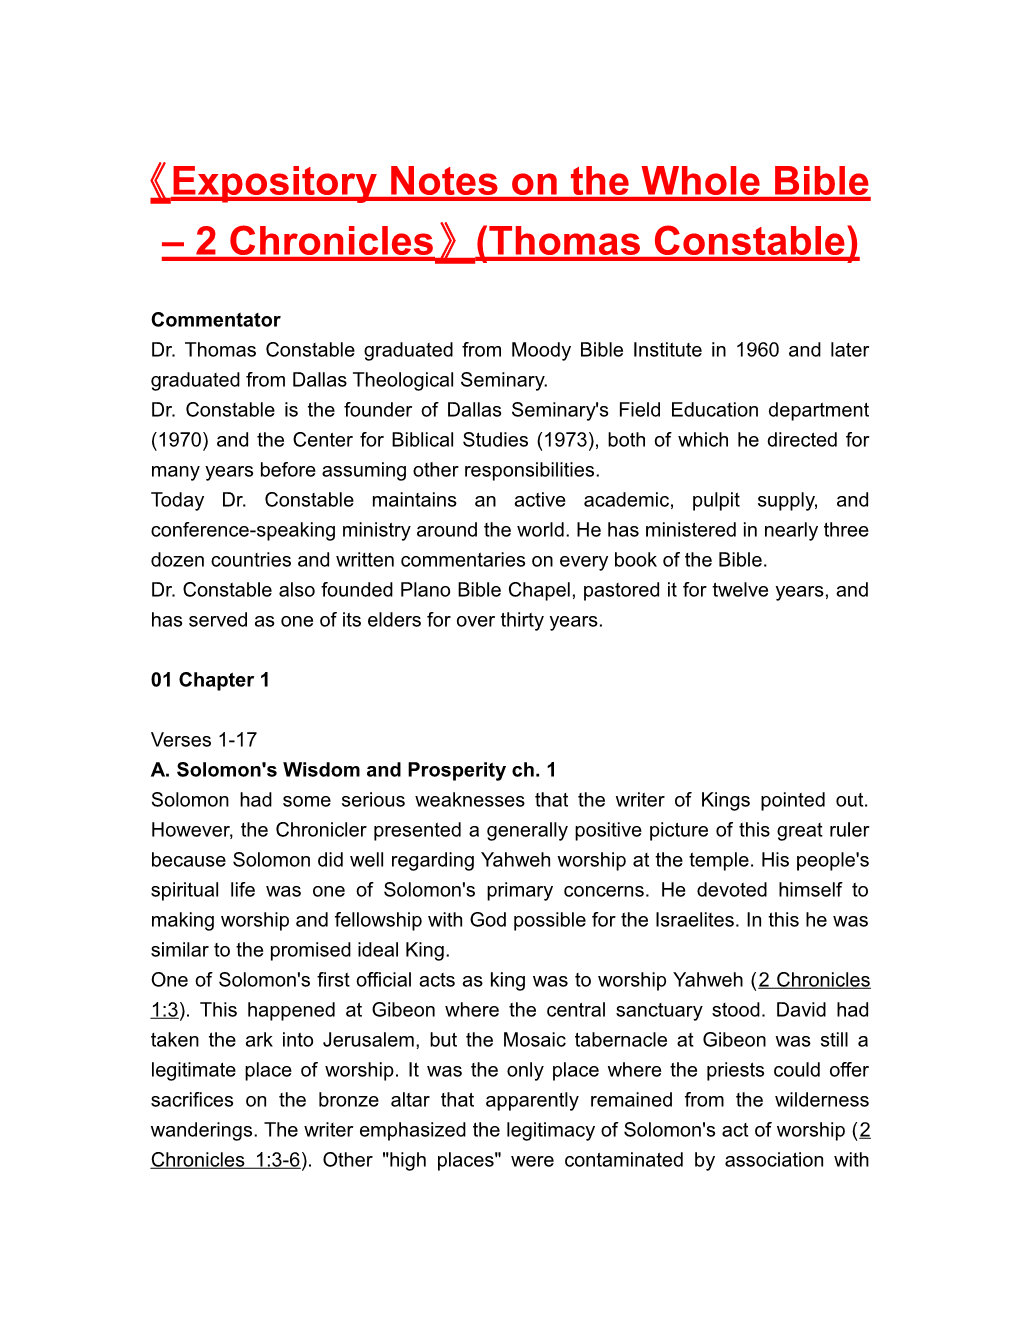 Expositorynotes on the Wholebible 2 Chronicles (Thomas Constable)